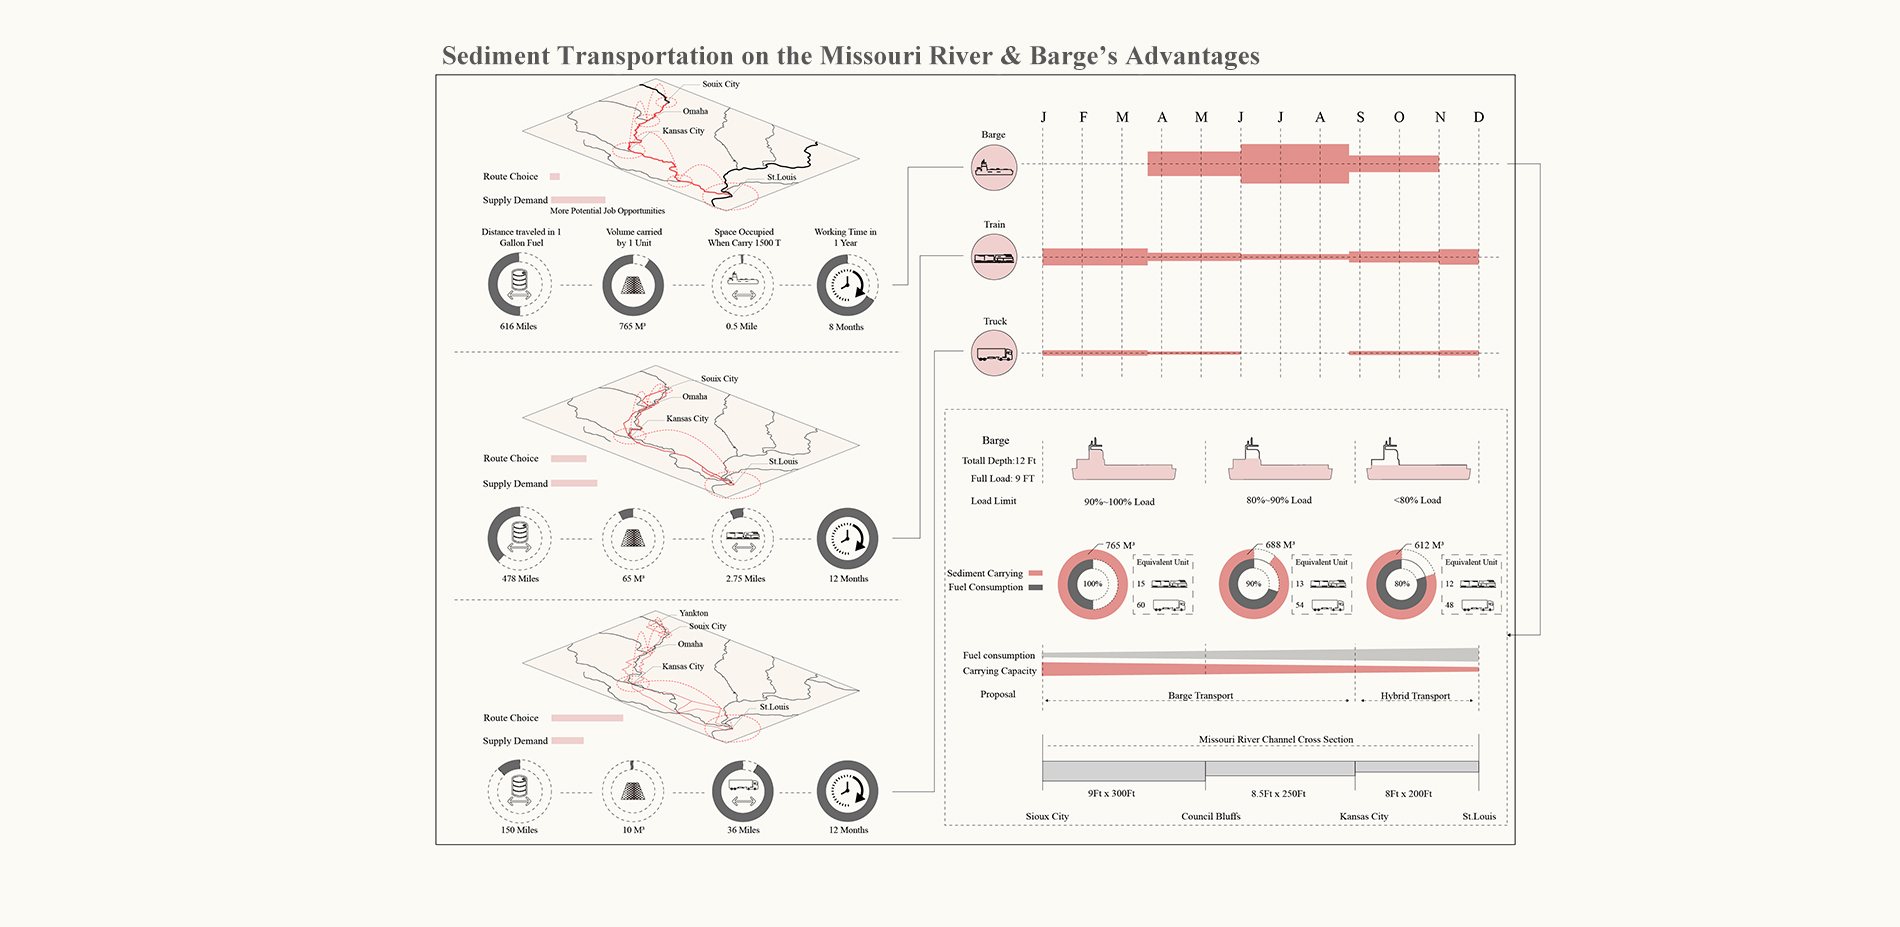 Sediment transportation on the Missouri River and the continued advantages of utilizing barges